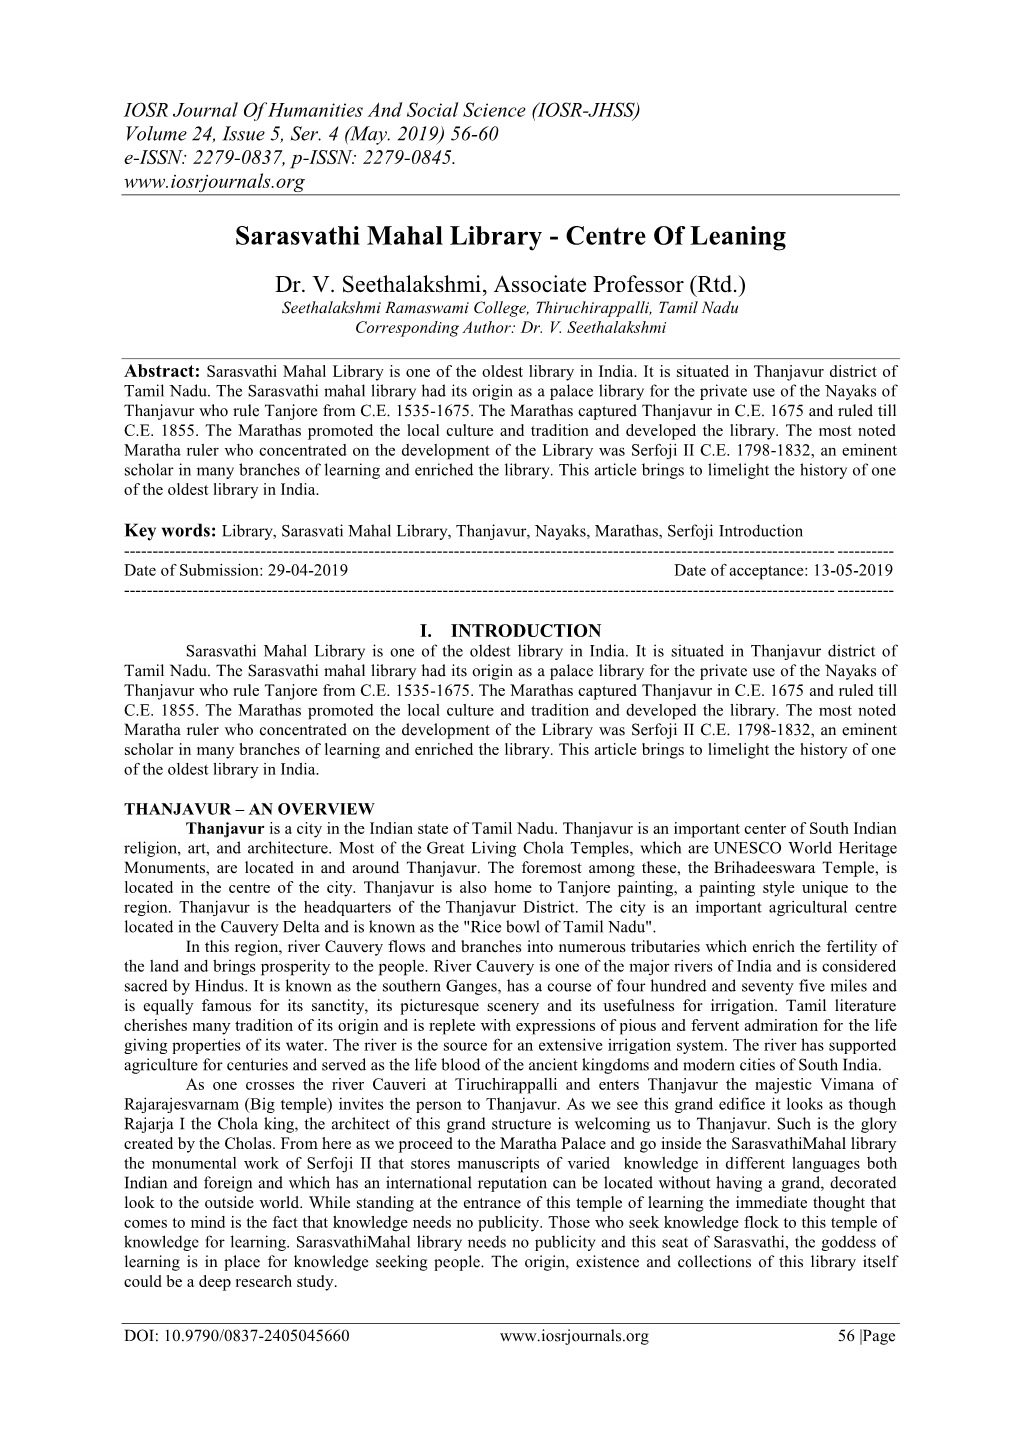 Sarasvathi Mahal Library - Centre of Leaning